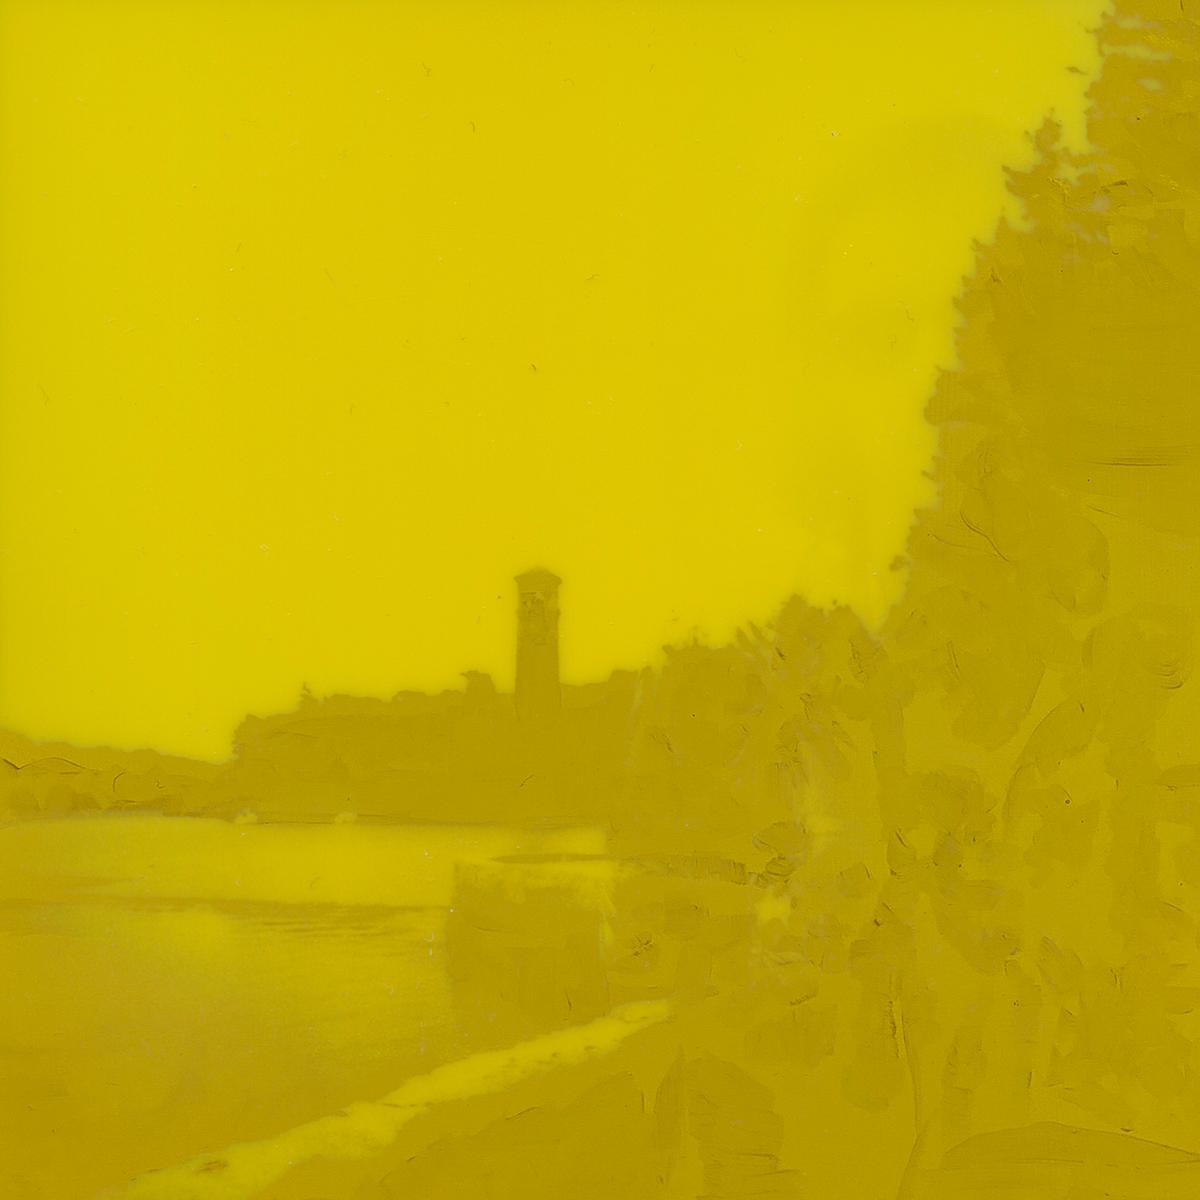 landscape image with view of a river with a tower in the background and foliage along the riverbank with a yellow overlay